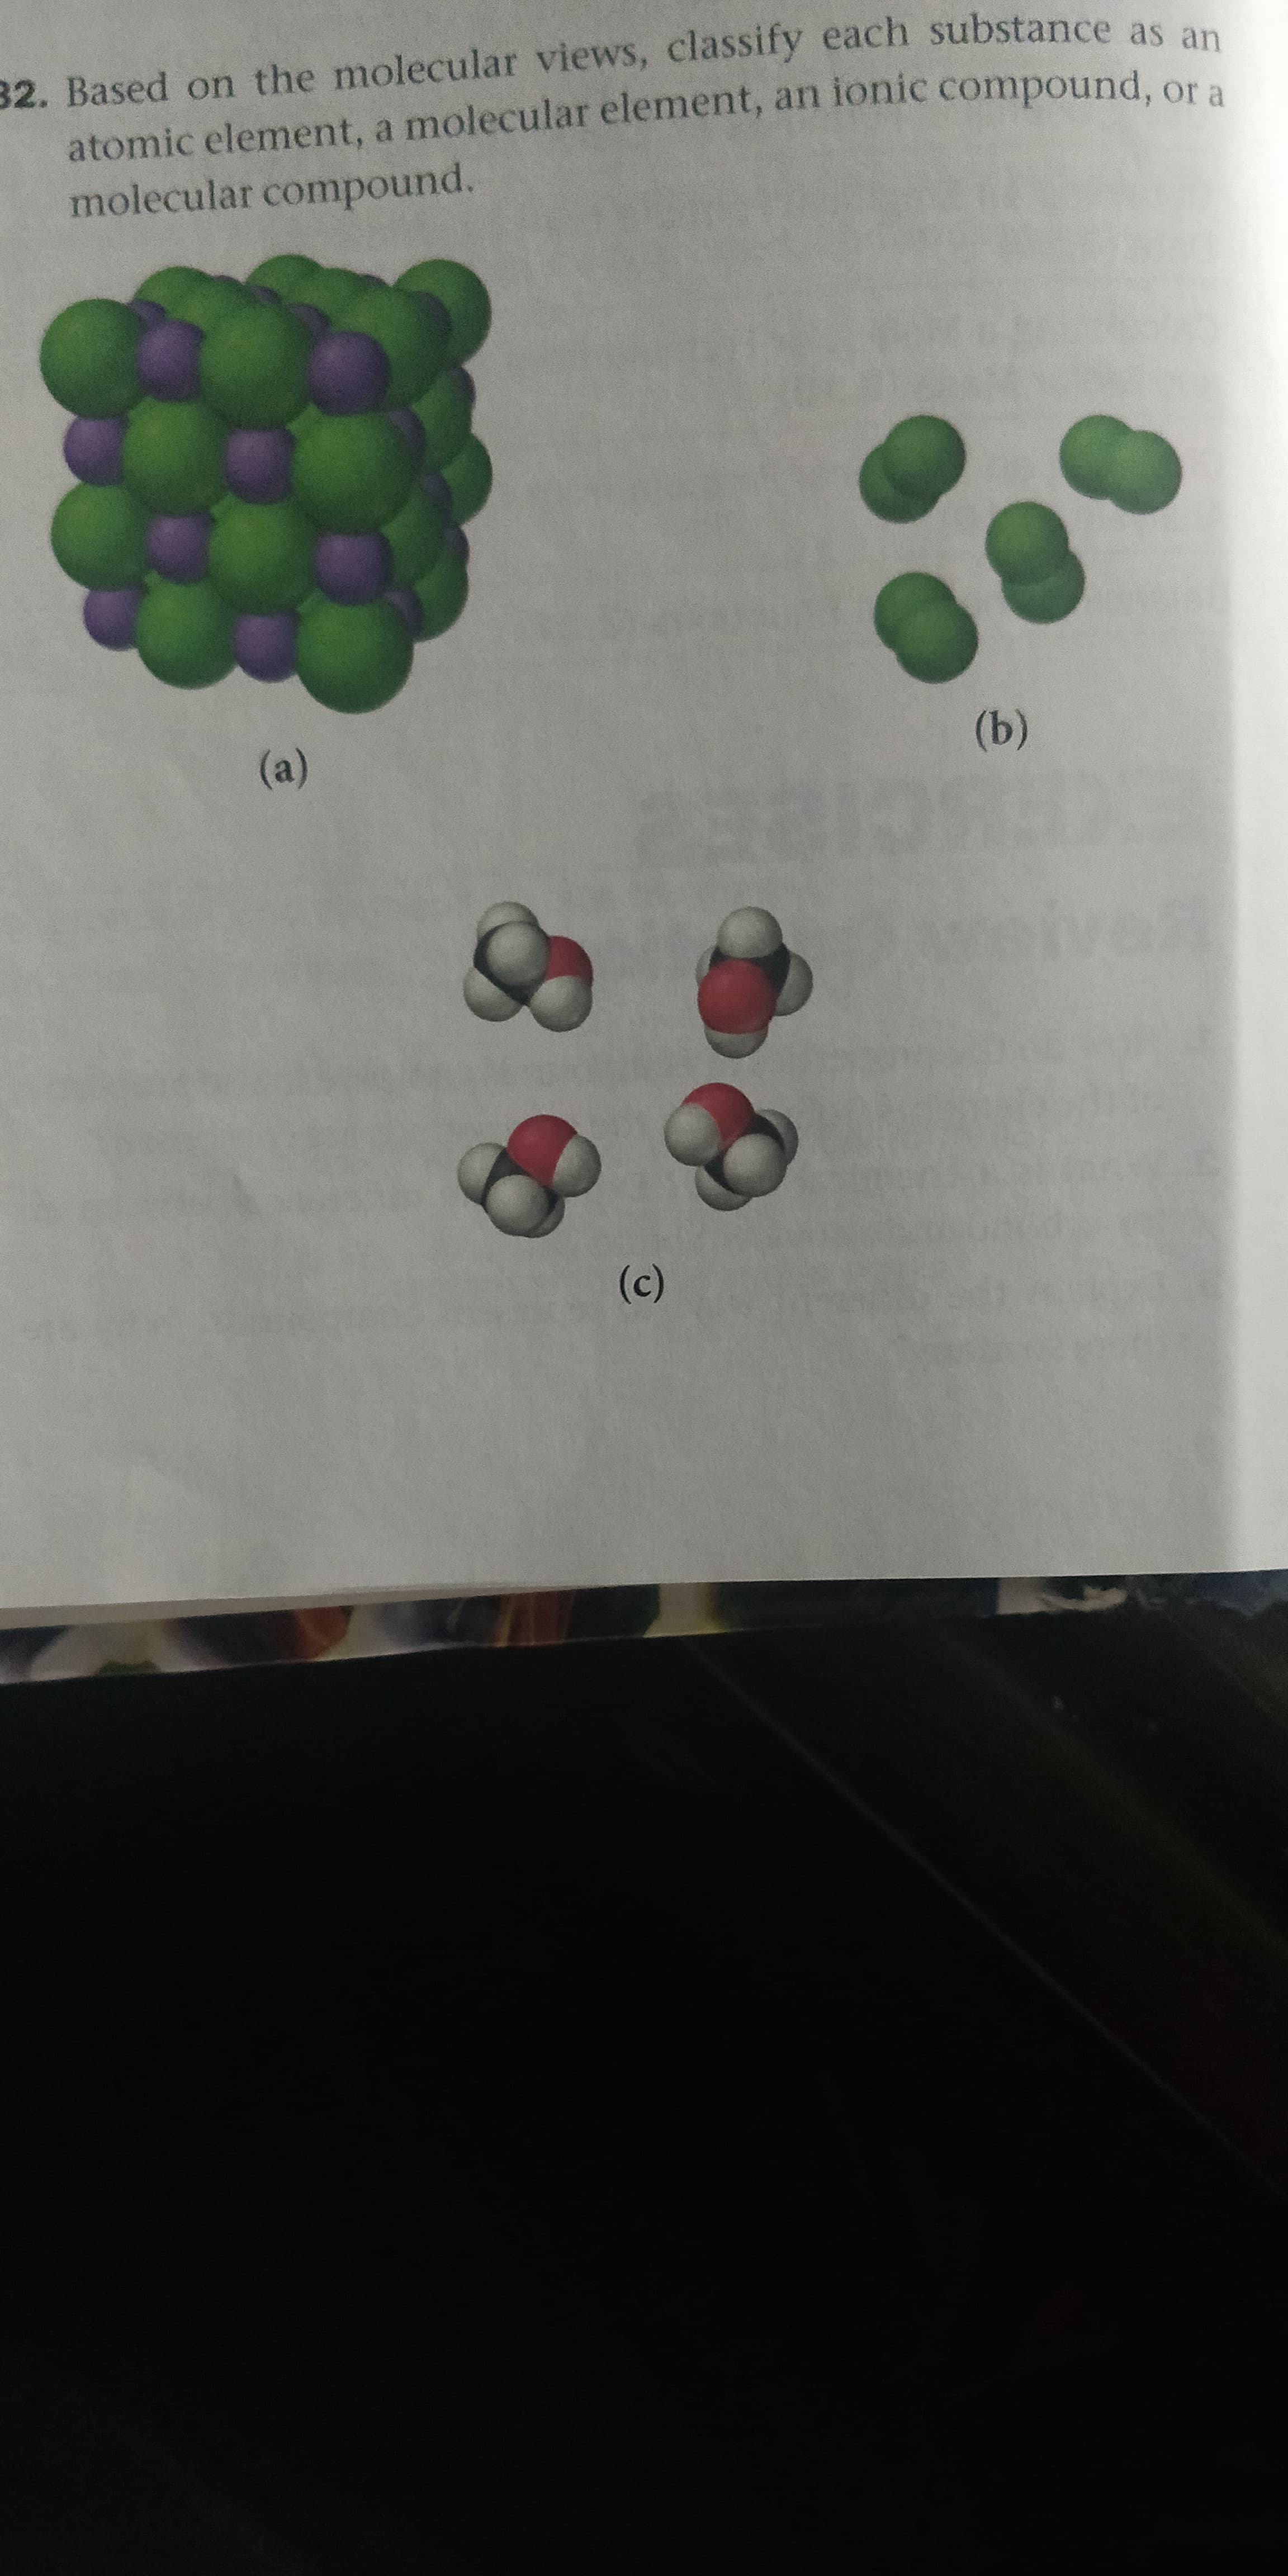 32. Based on the molecular views, classify each substance as an
atomic element, a molecular element, an ionic compound, or a
molecular compound.
(b)
(a)
(c)
